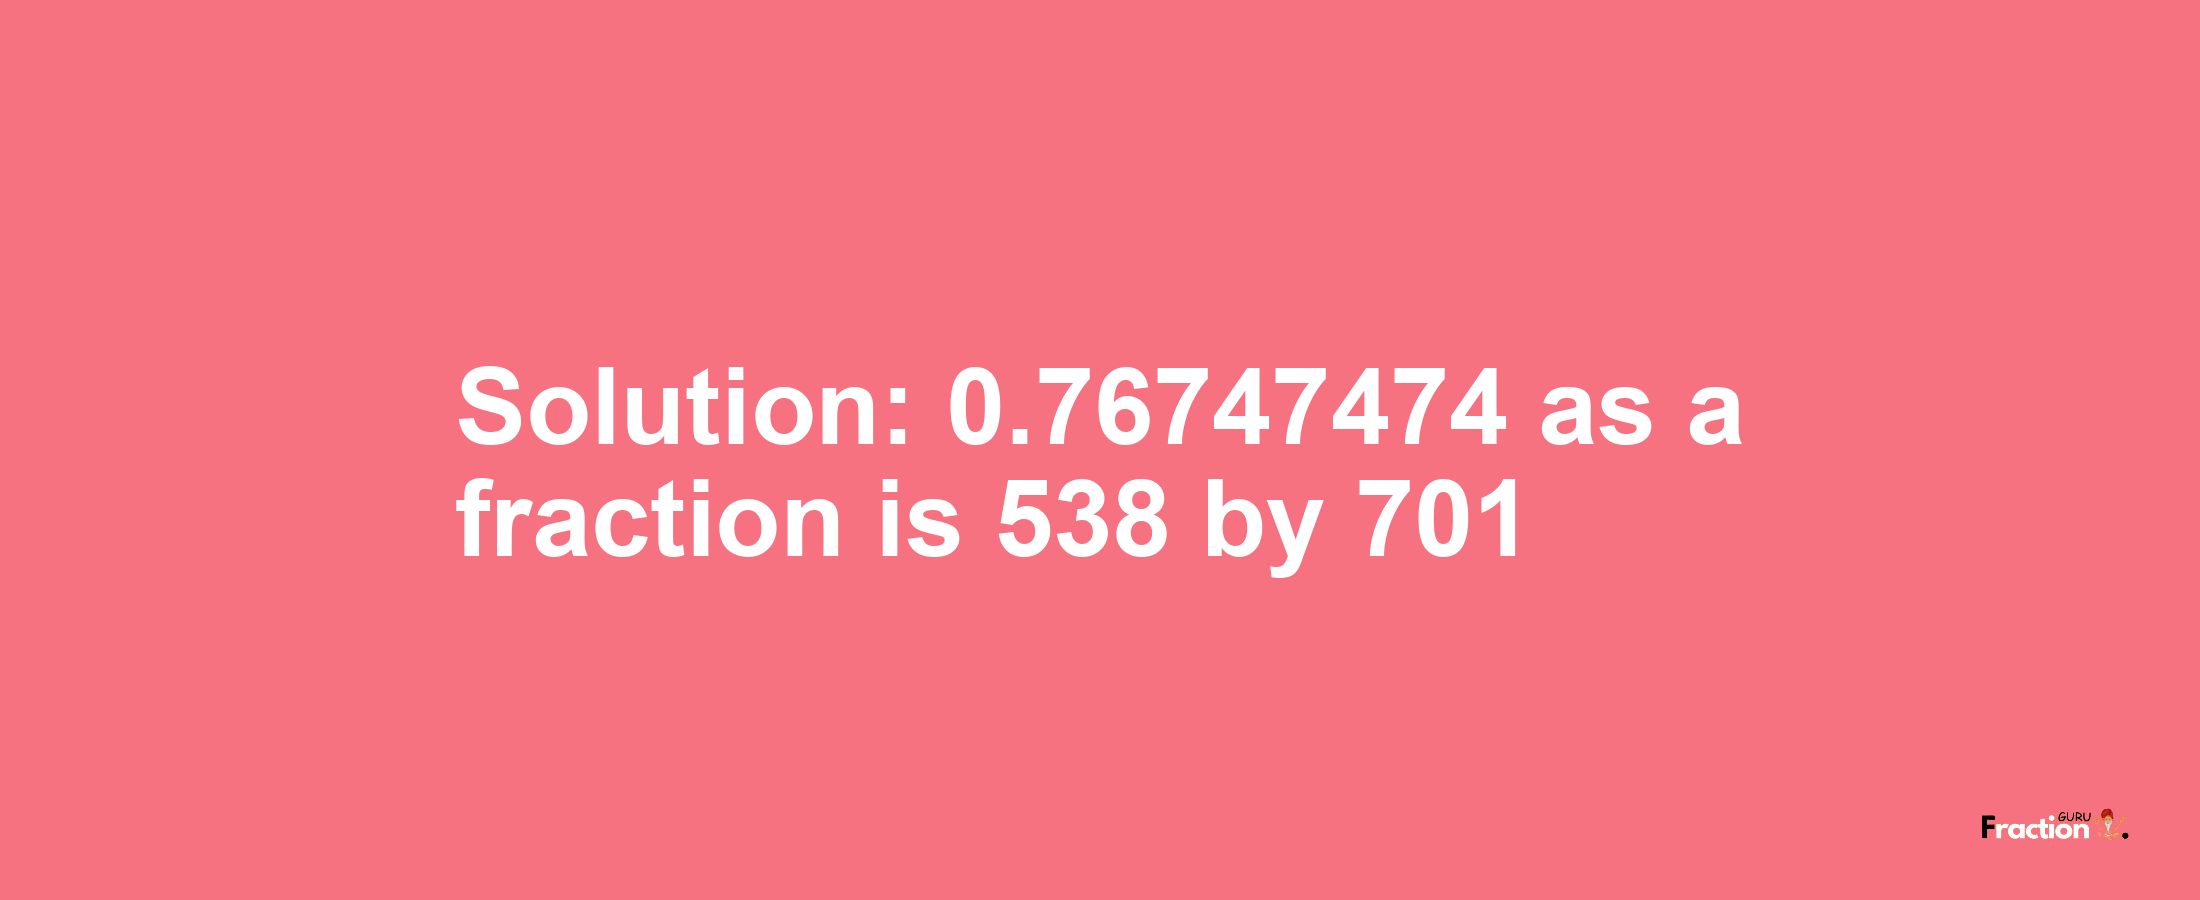 Solution:0.76747474 as a fraction is 538/701